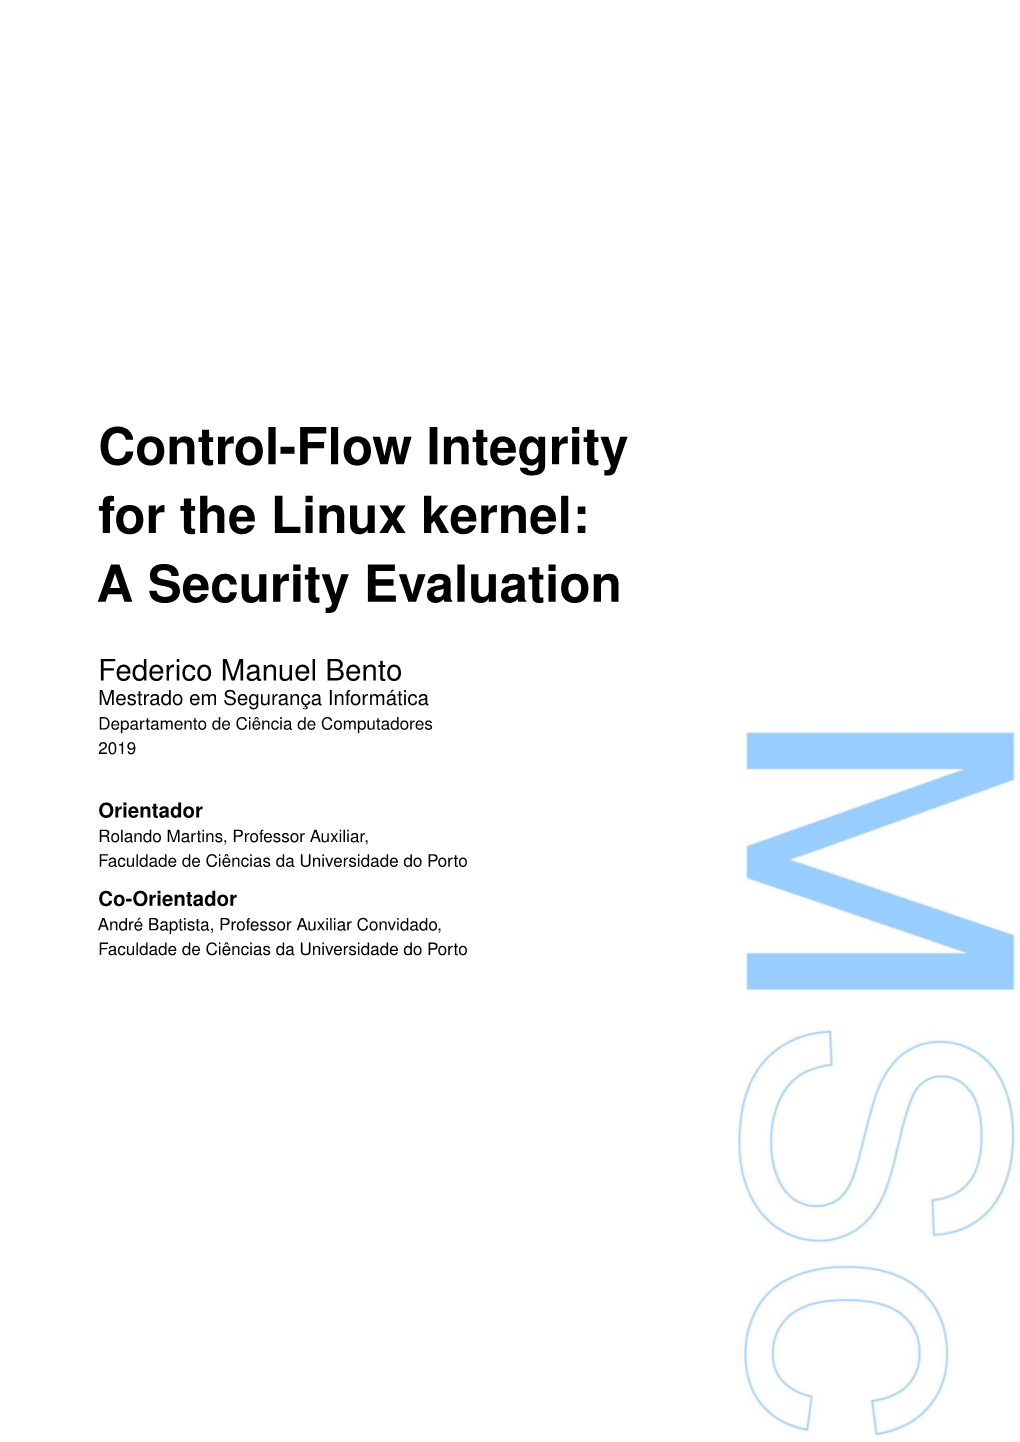 Control-Flow Integrity for the Linux Kernel: a Security Evaluation